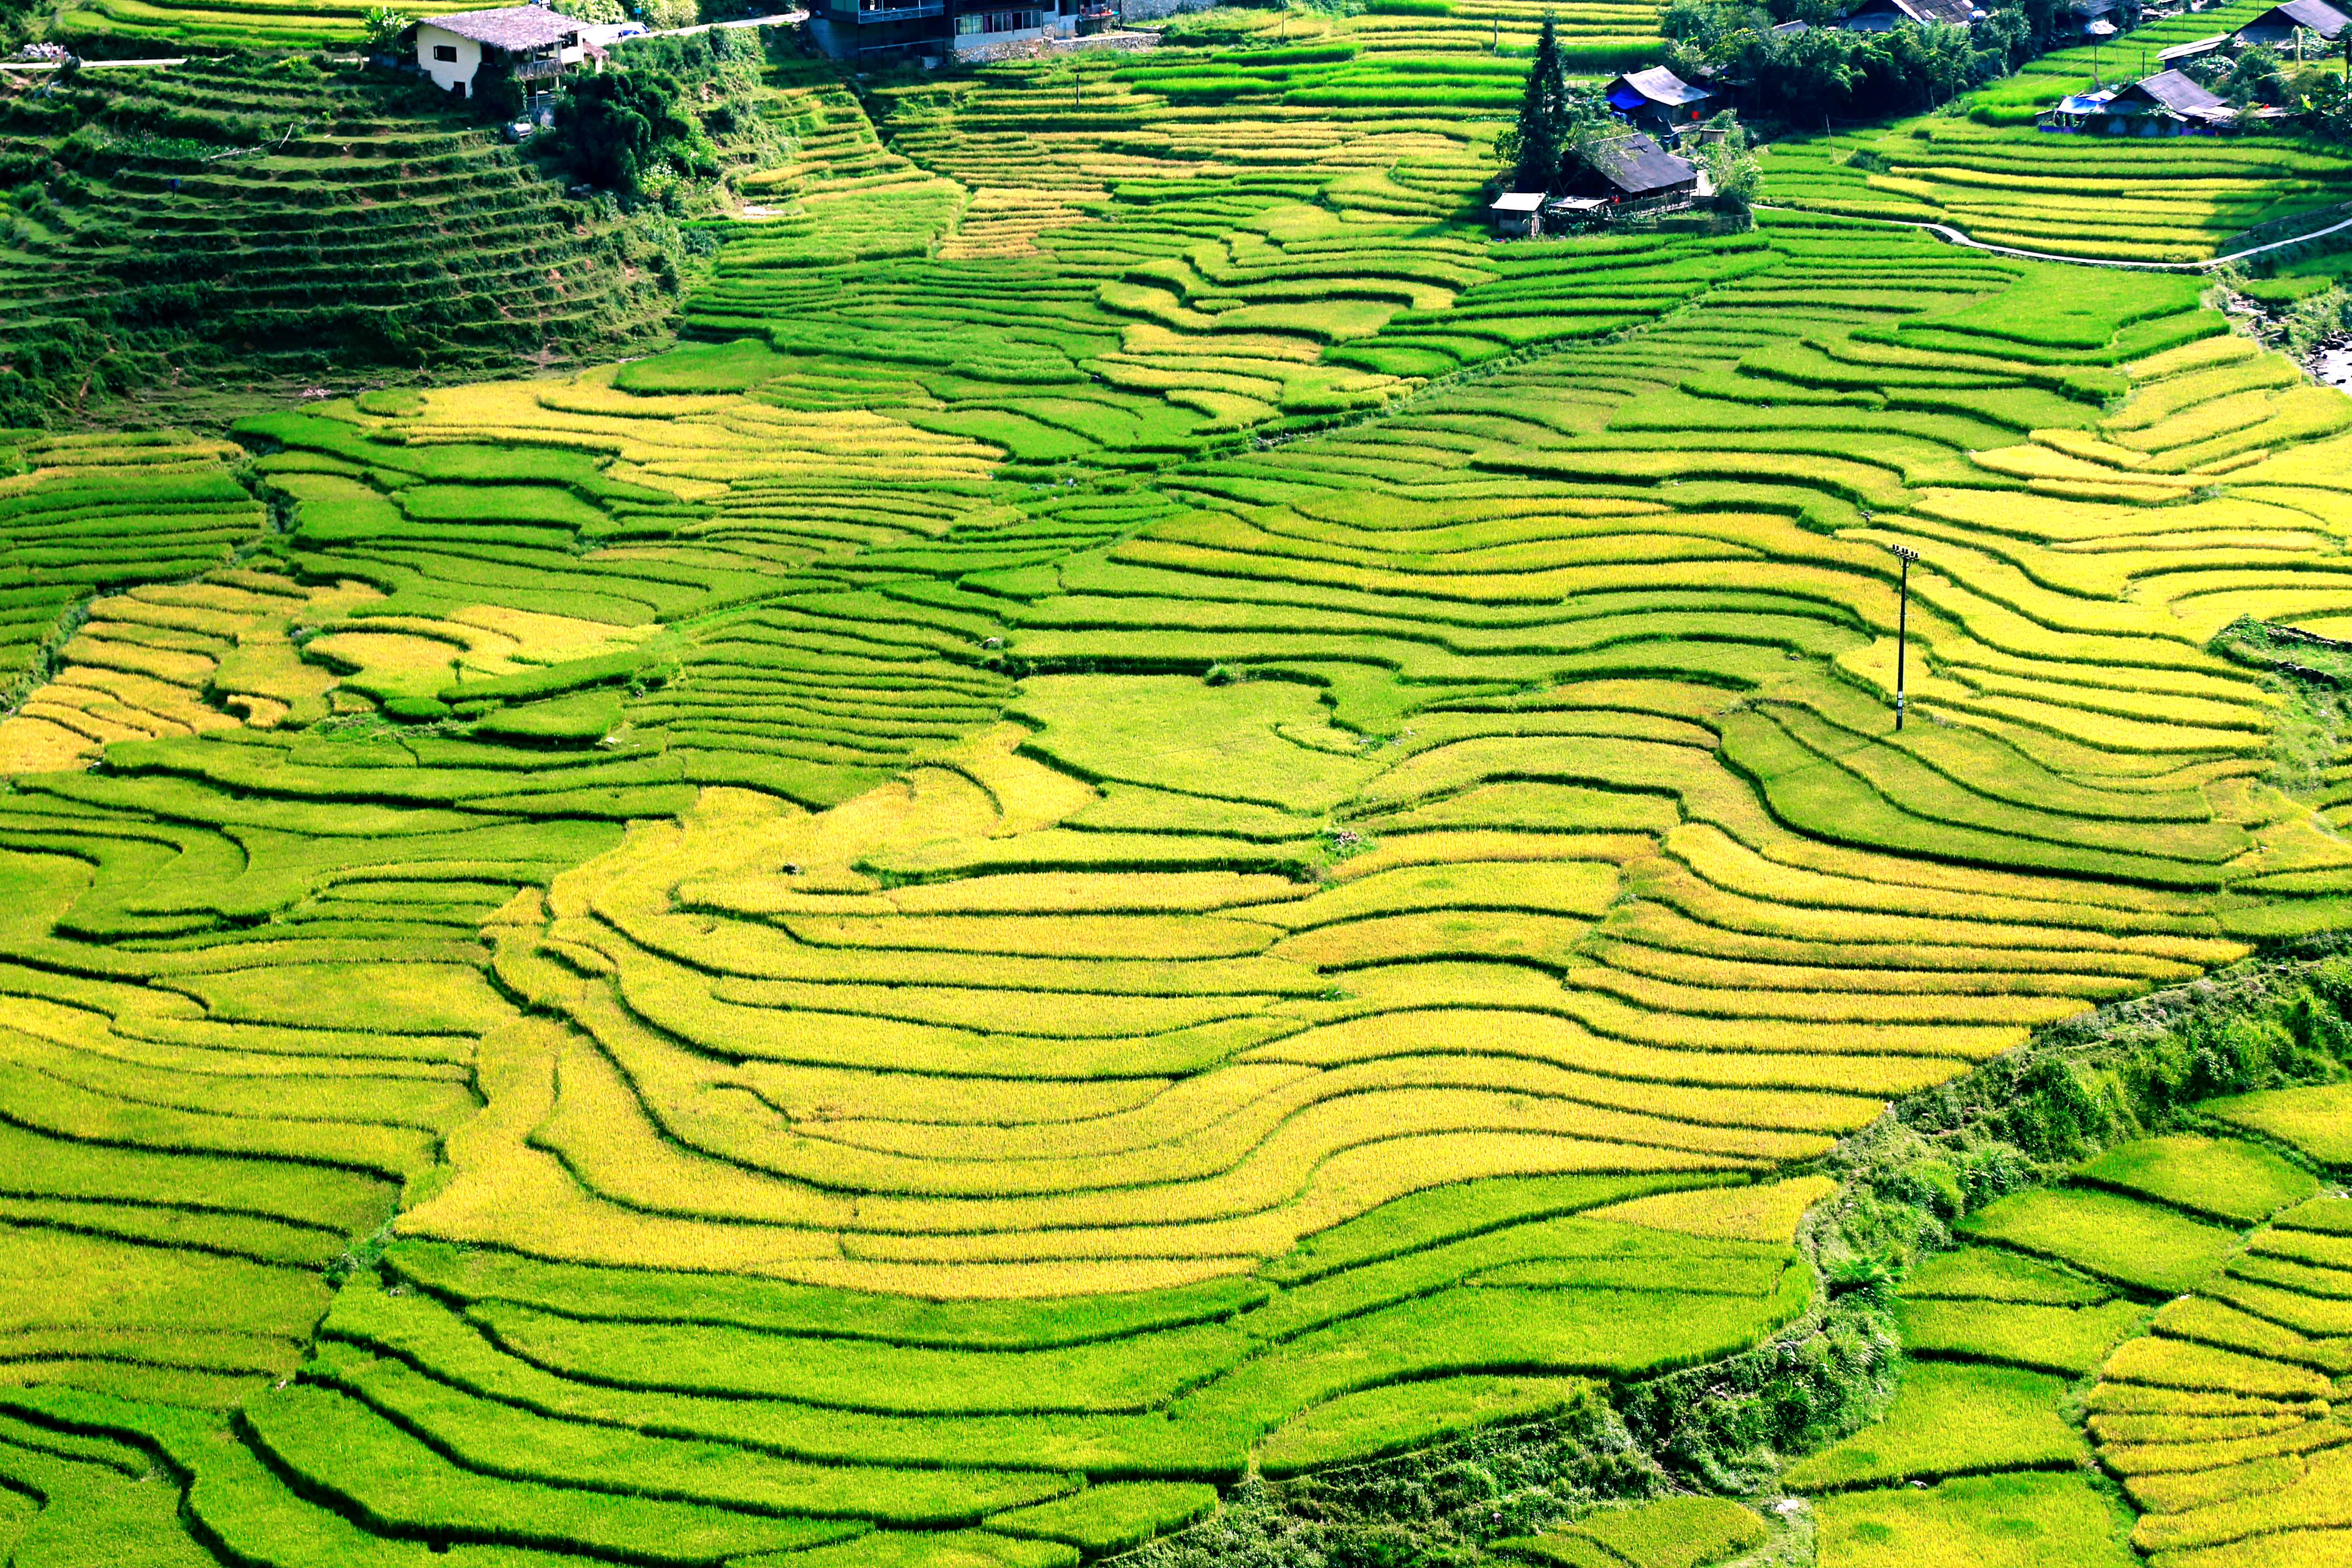 The beauty of the ‘gold season’ in Muong Hoa Valley in Sa Pa, Lao Cai Province, northern Vietnam